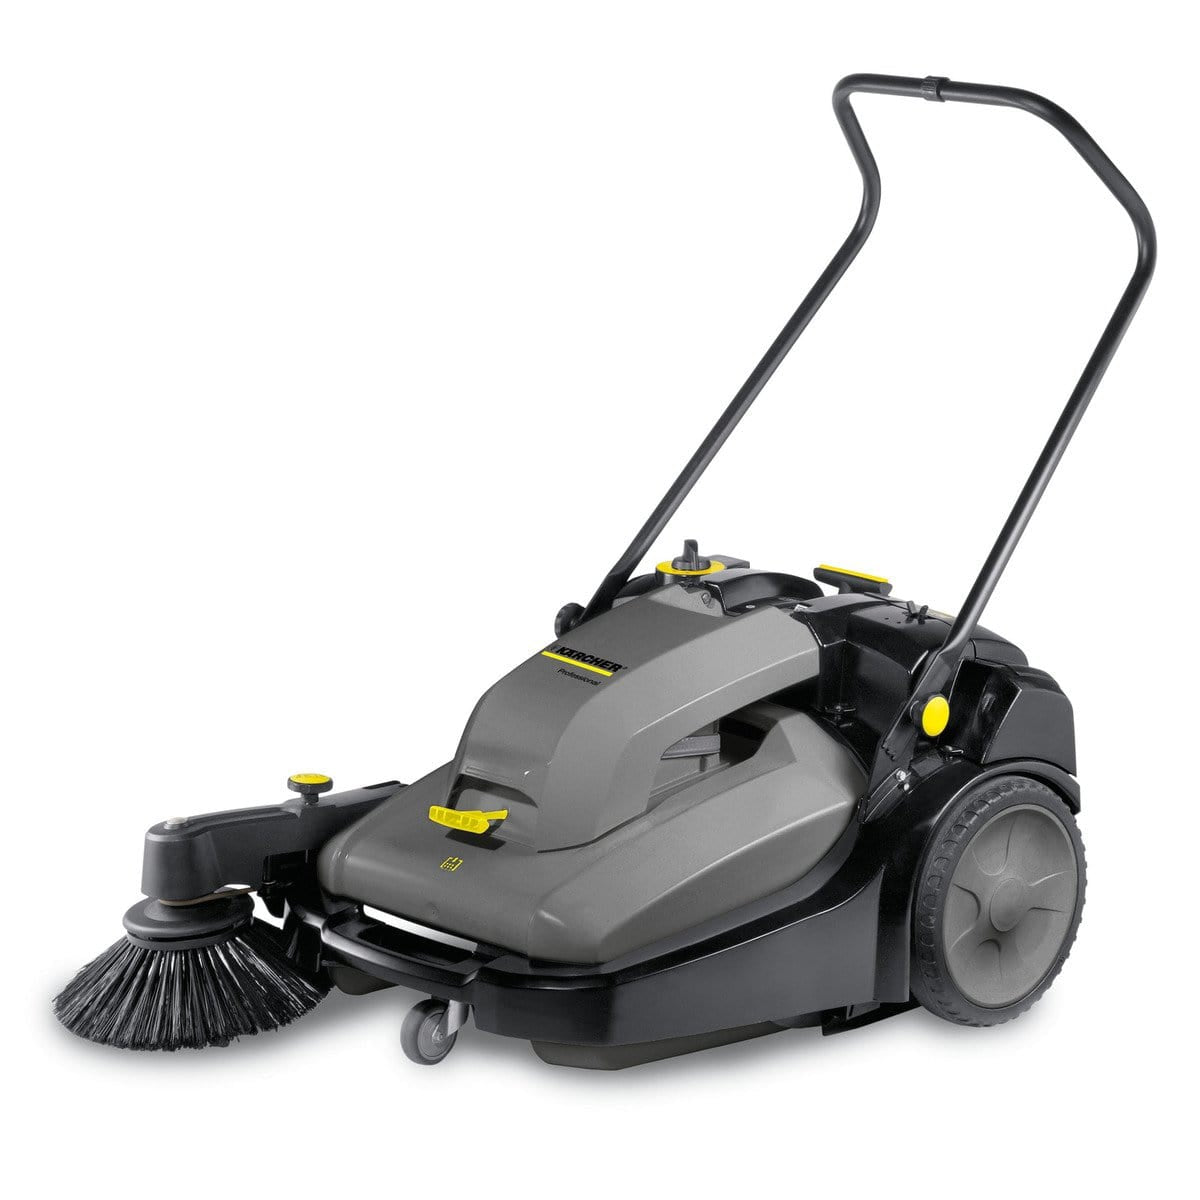 Karcher Manual Push Sweeper - S 650 | Supply Master | Accra, Ghana Tools Building Steel Engineering Hardware tool